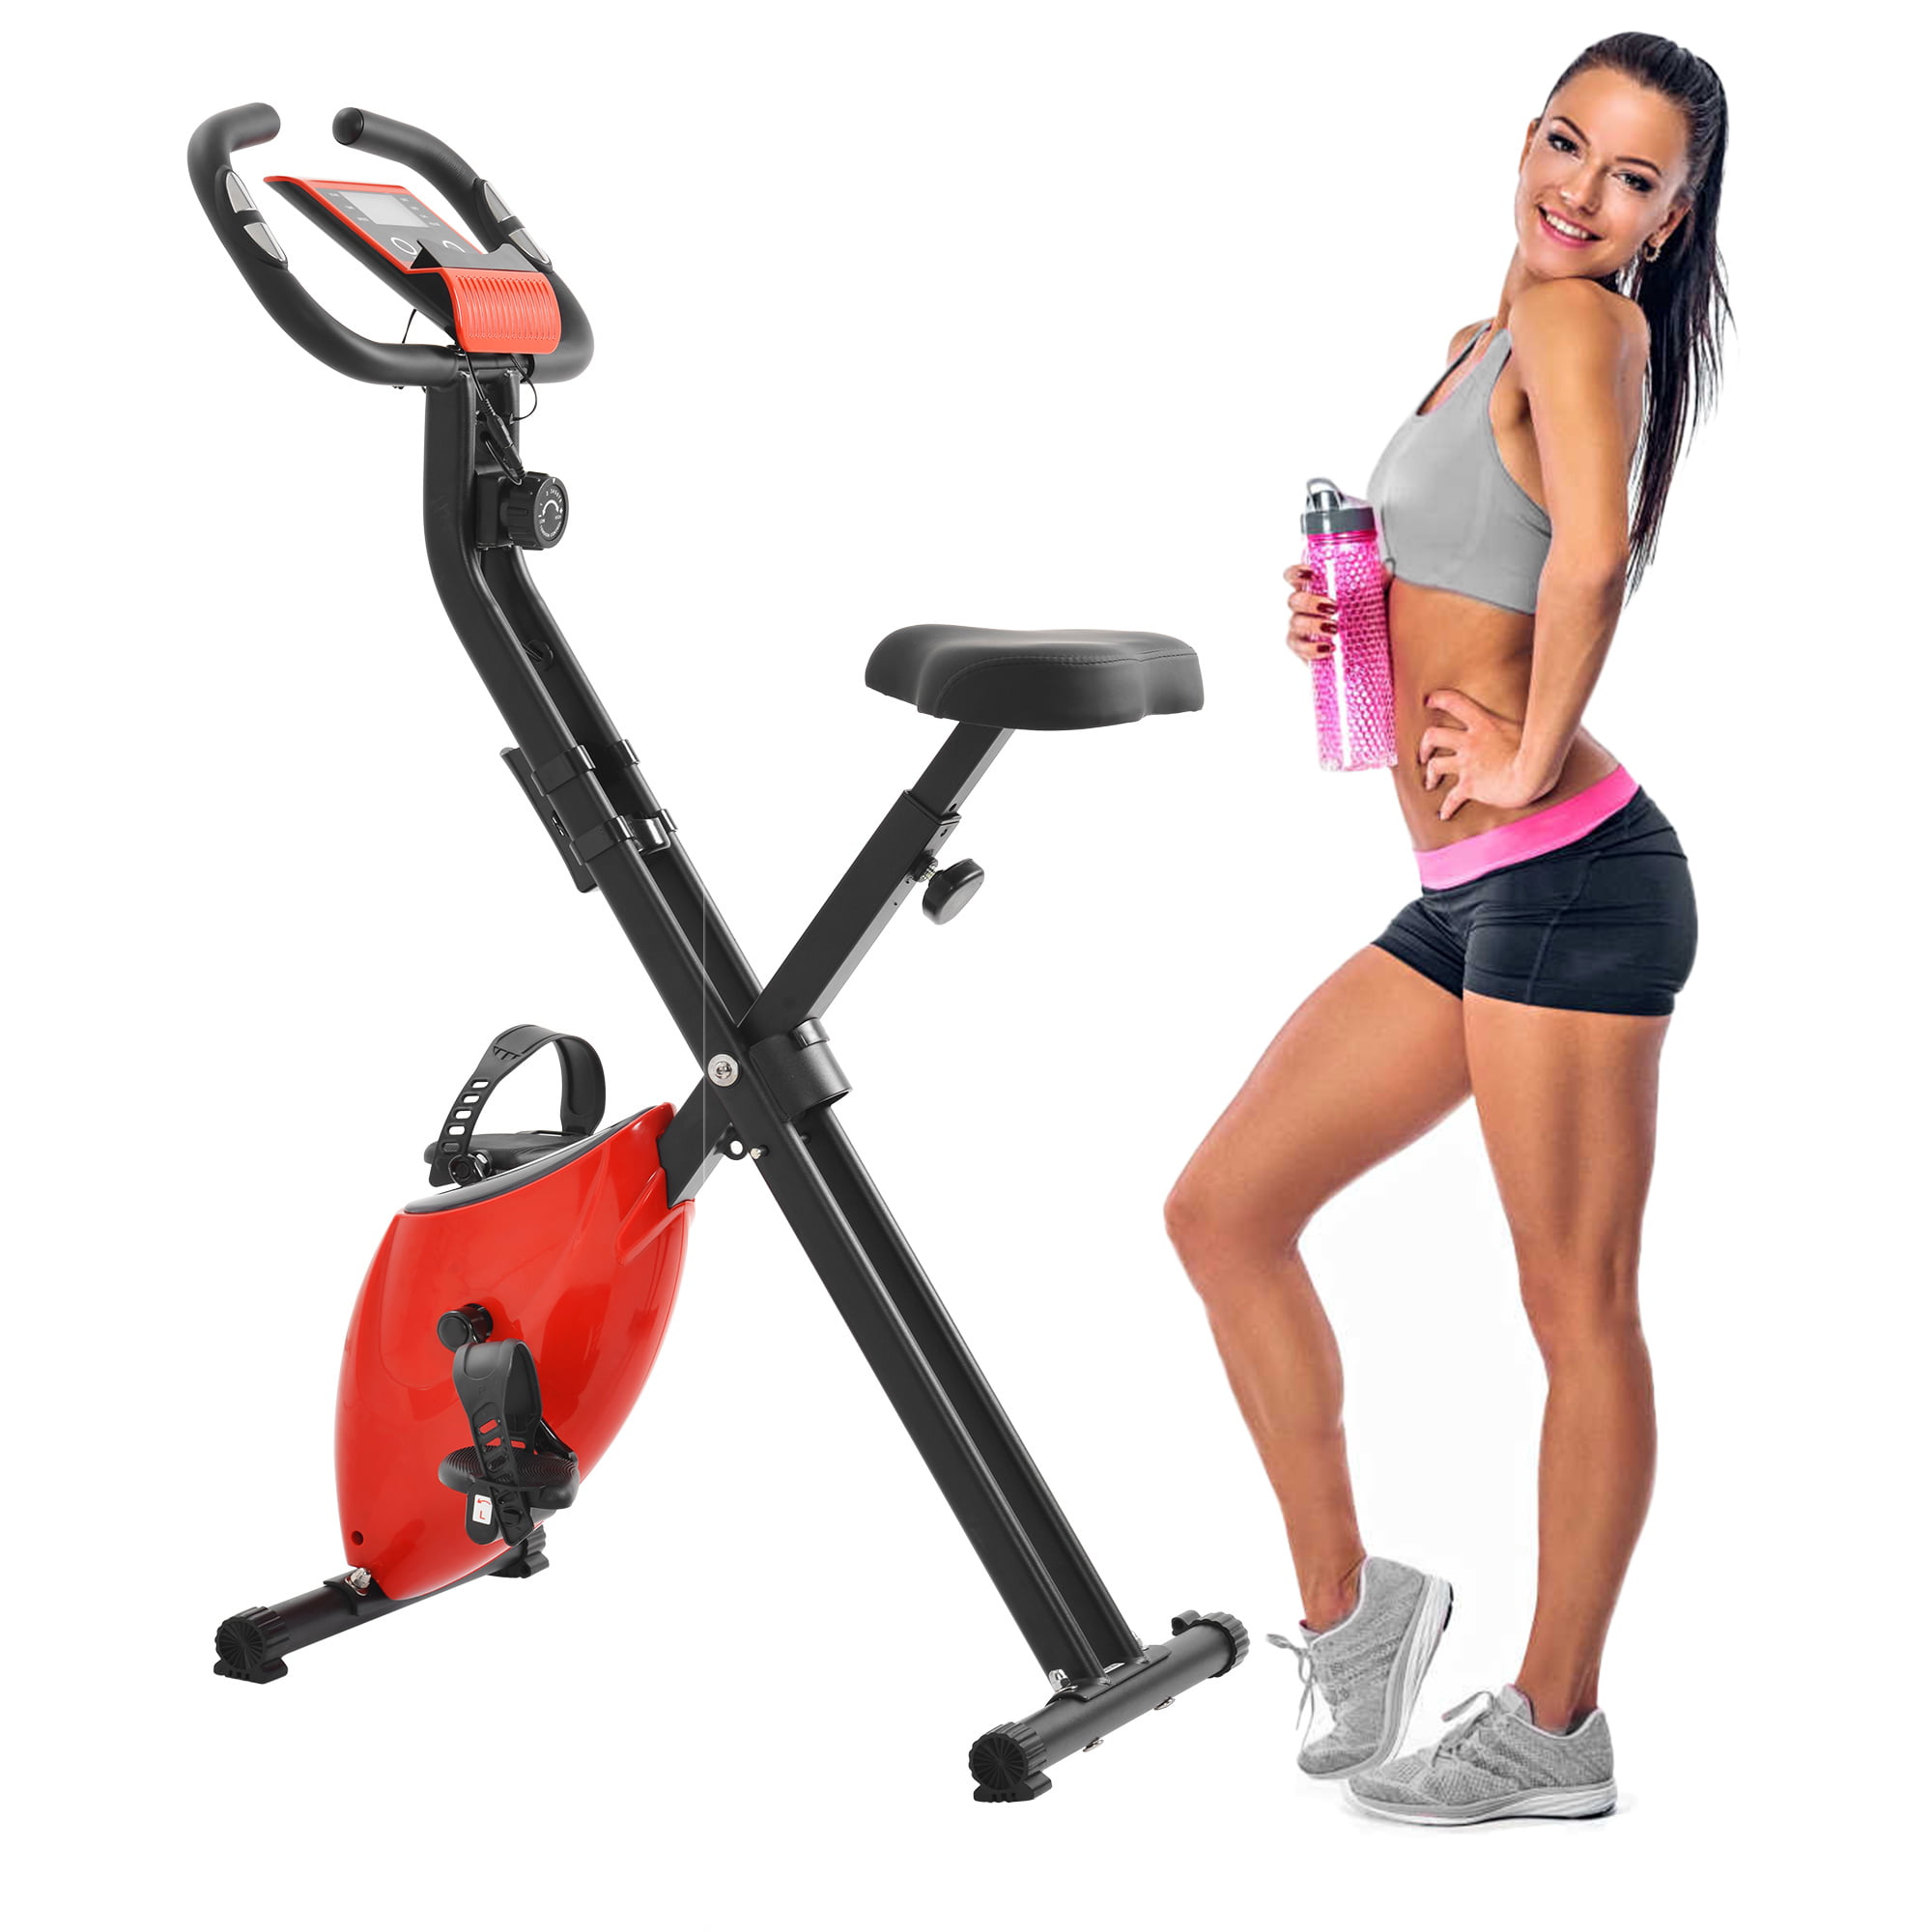 Details about   Folding Stationary Upright Indoor Resistance Cycling Exercise Bike Gym Workout U 